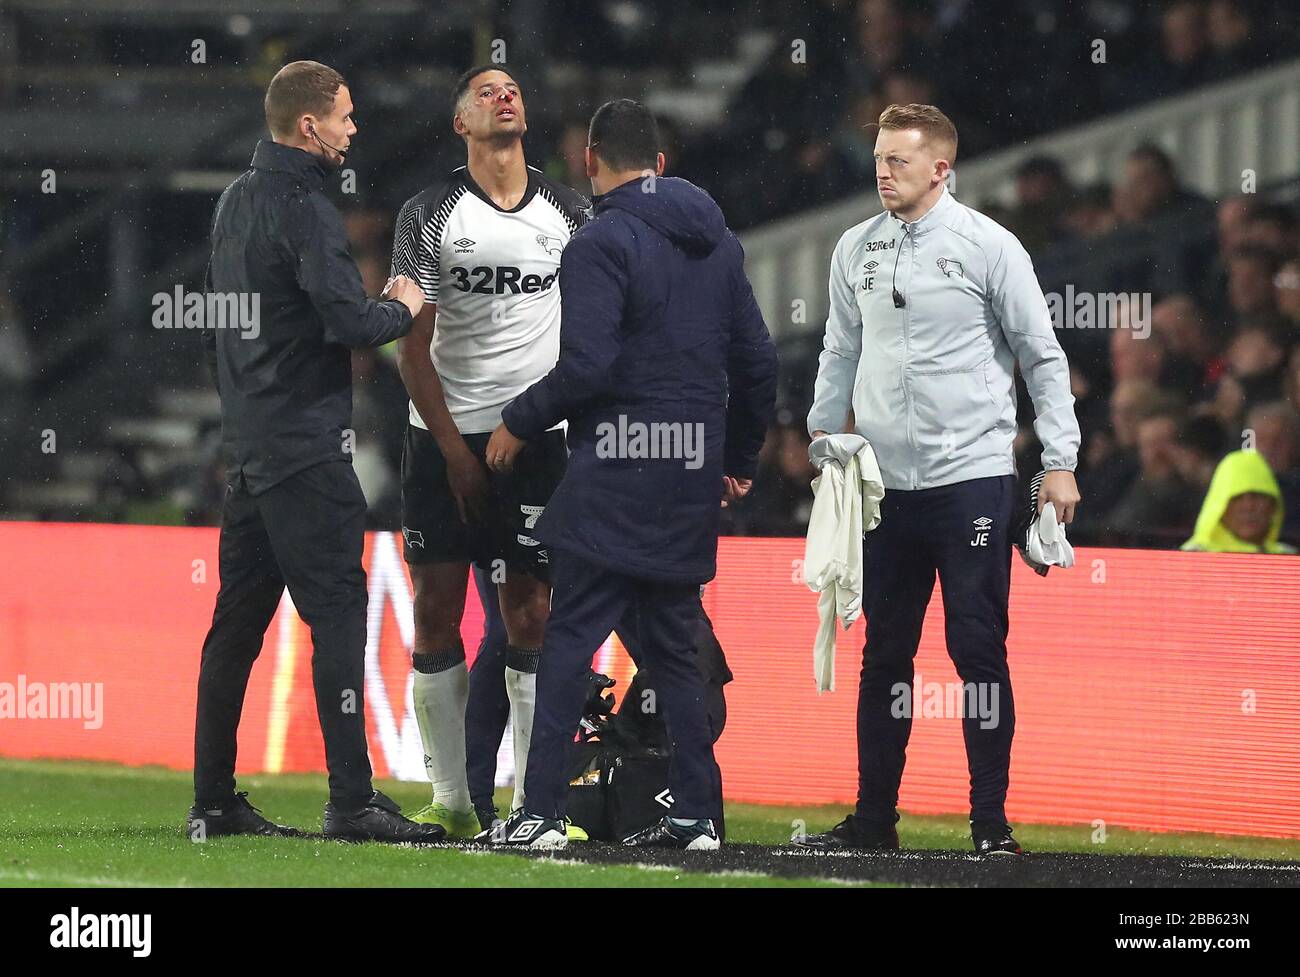 Derby County's Curtis Davies changes his shirt after receiving a kick from Wigan Athletic's Kieffer Moore (not pictured) Stock Photo